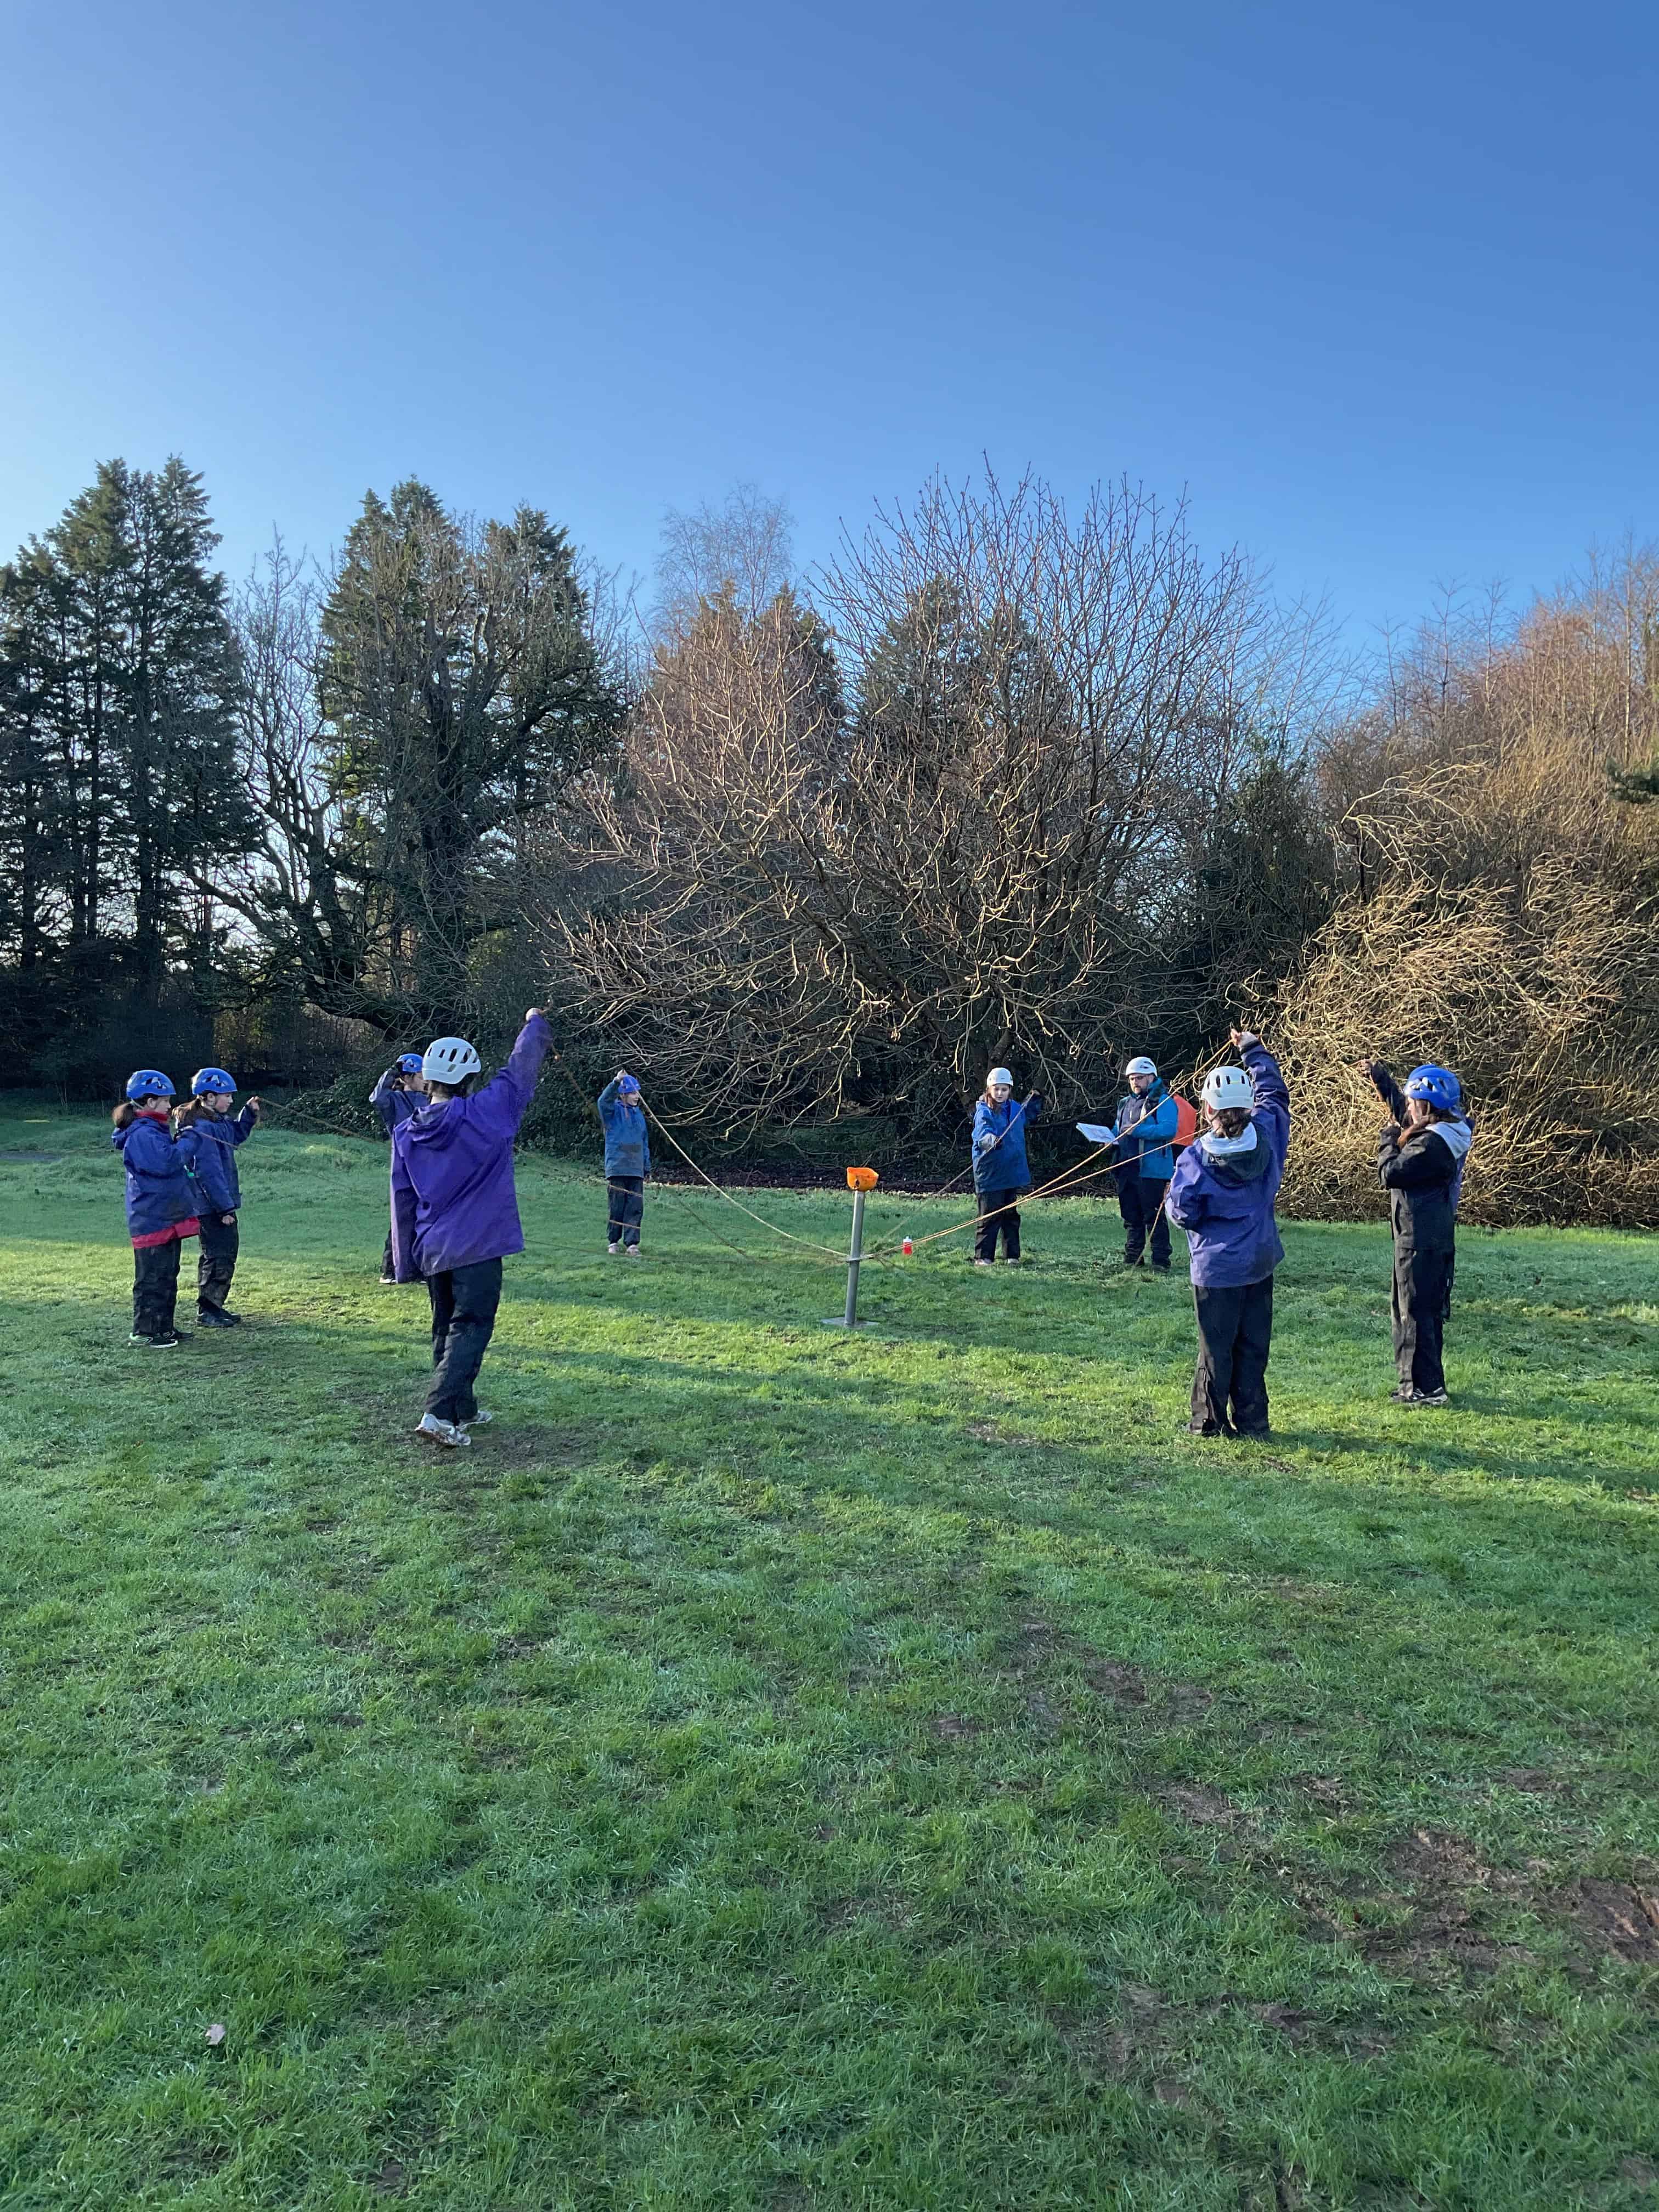 Students from Priestnall School stand in a circle on a field each holding a rope, working together to get an object to a centre point with their ropes.